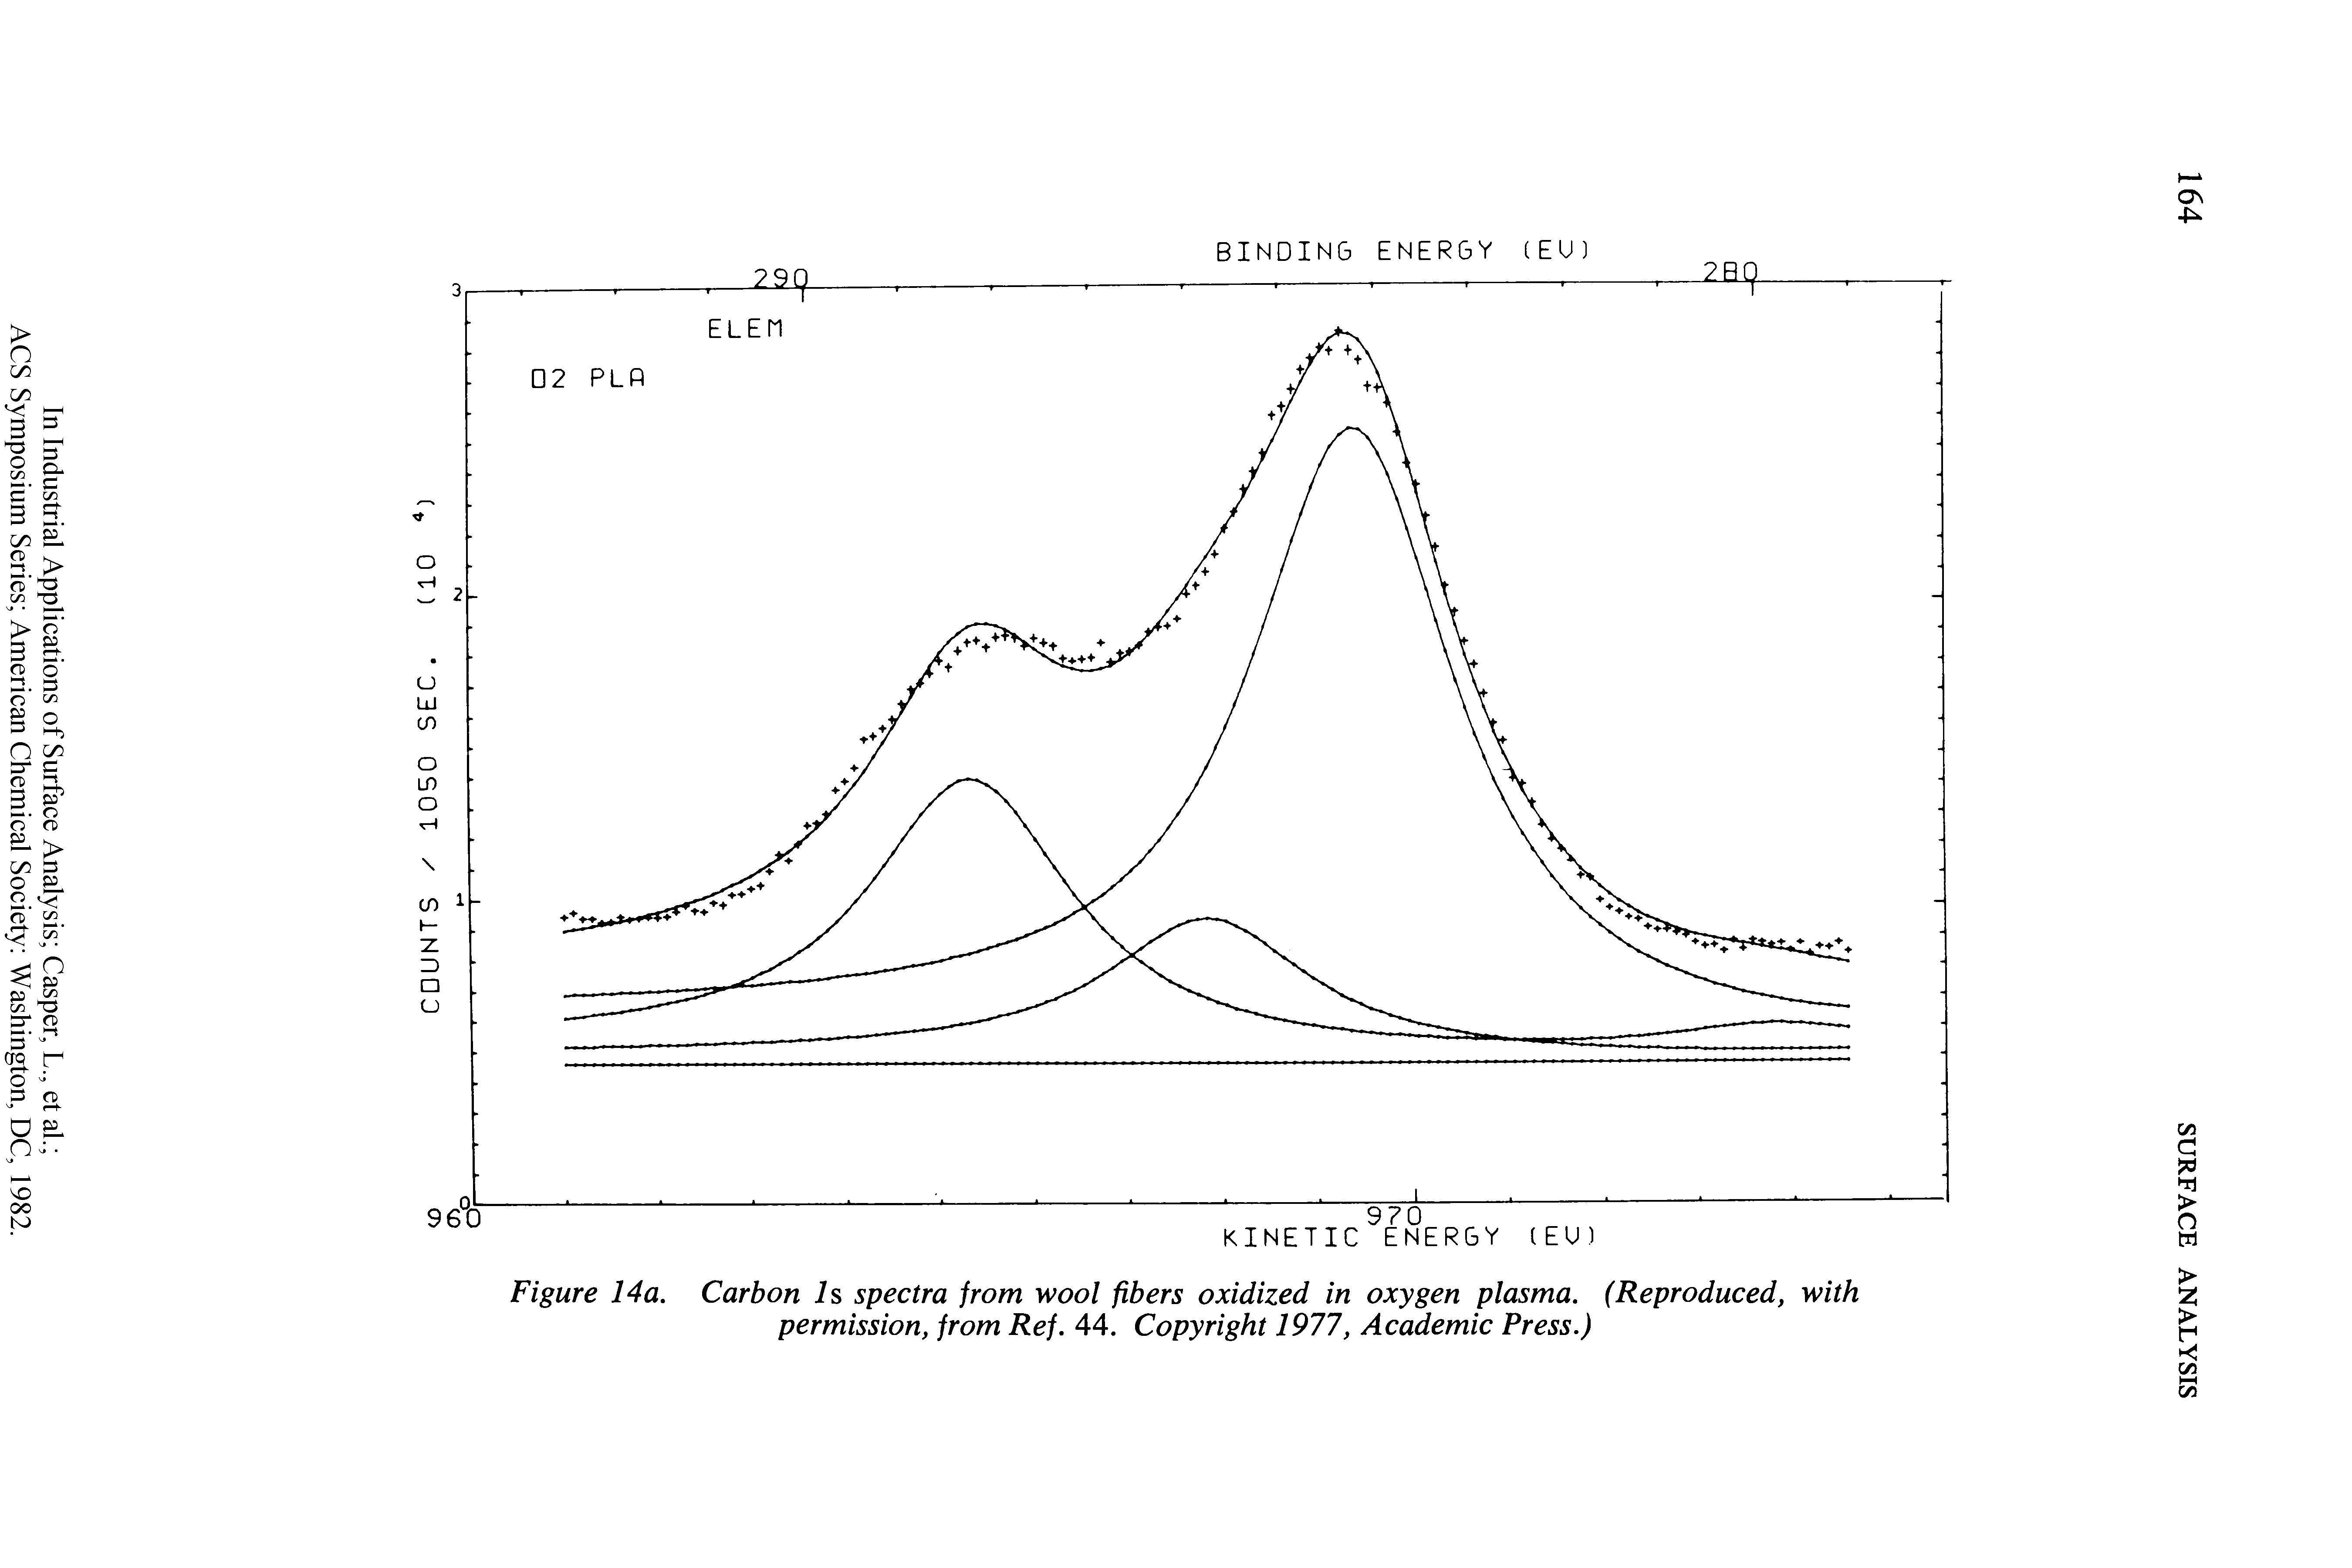 Figure 14a. Carbon Is spectra from wool fibers oxidized in oxygen plasma. (Reproduced, with permission, from Ref. 44. Copyright 1977, Academic Press.)...